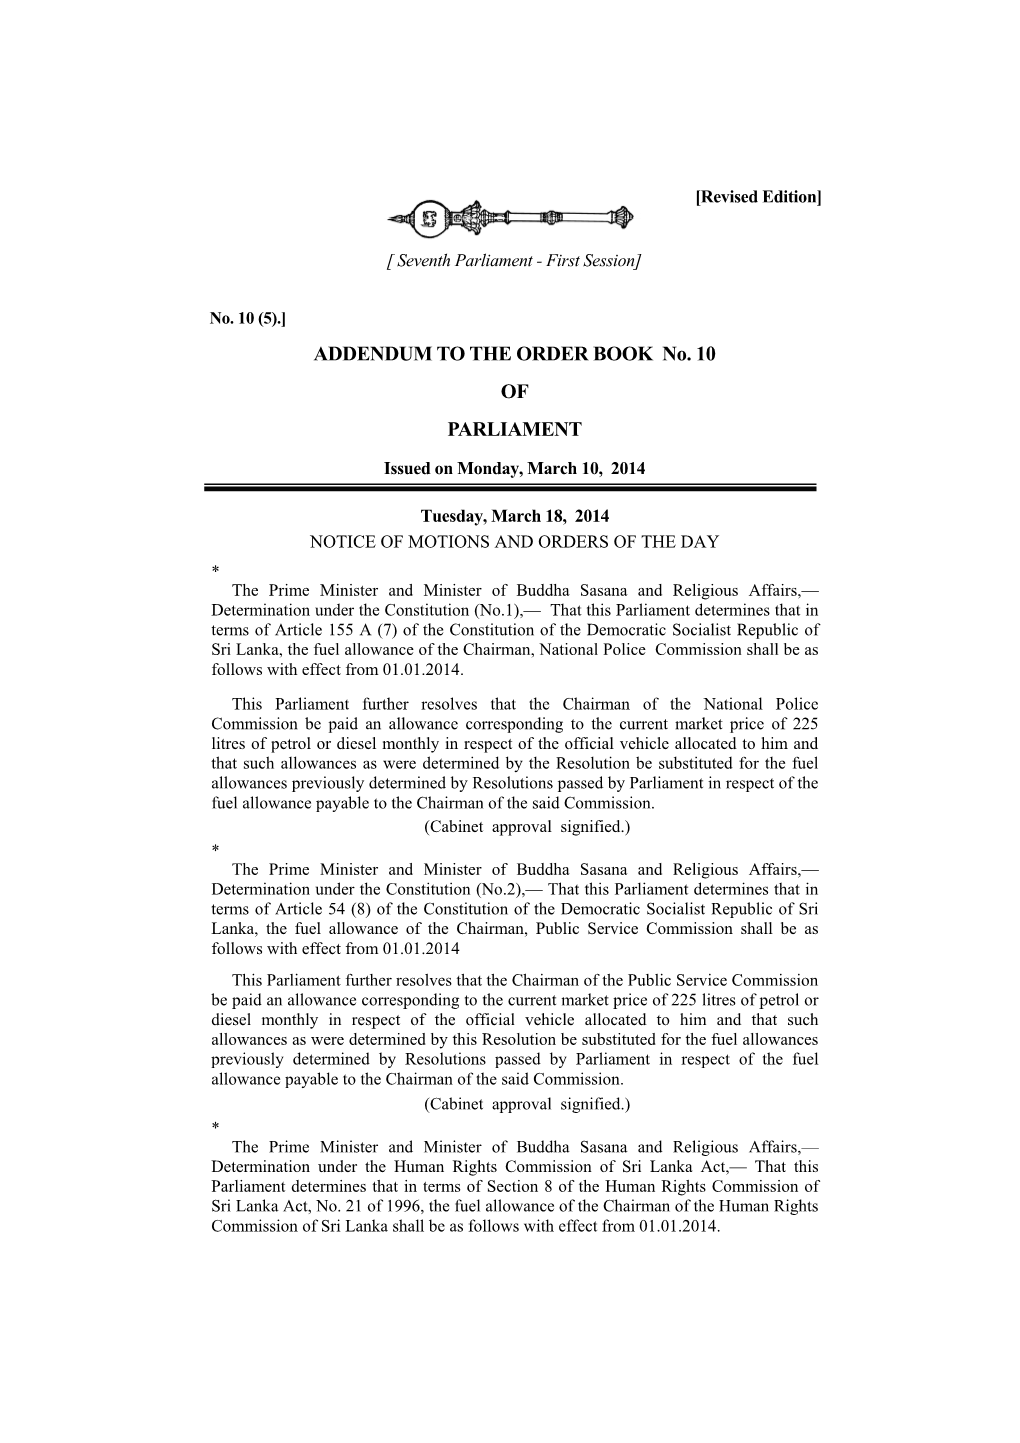 ADDENDUM to the ORDER BOOK No. 10 of PARLIAMENT